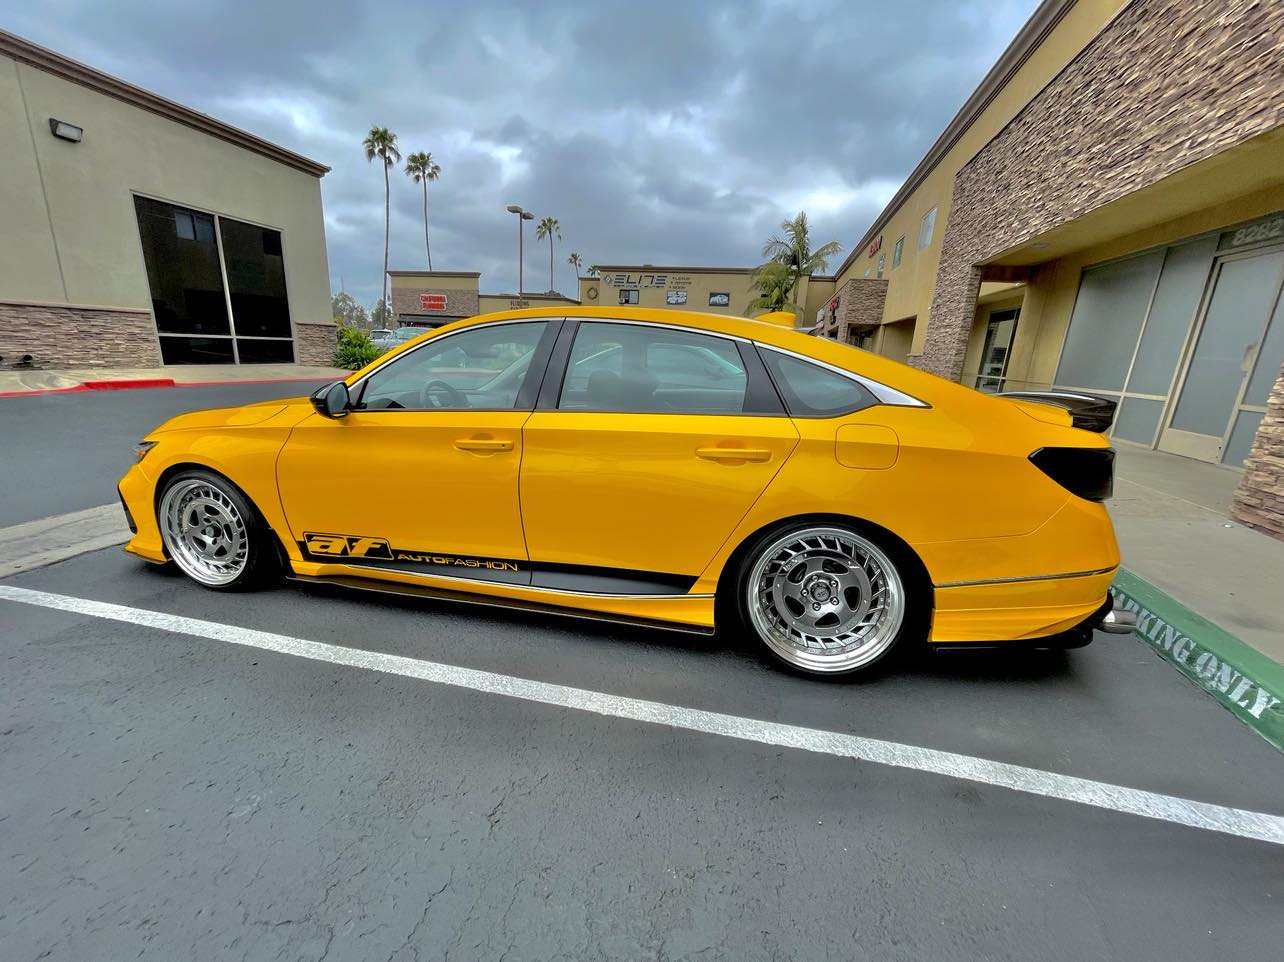 Nothing Mello about this Yellow Accord